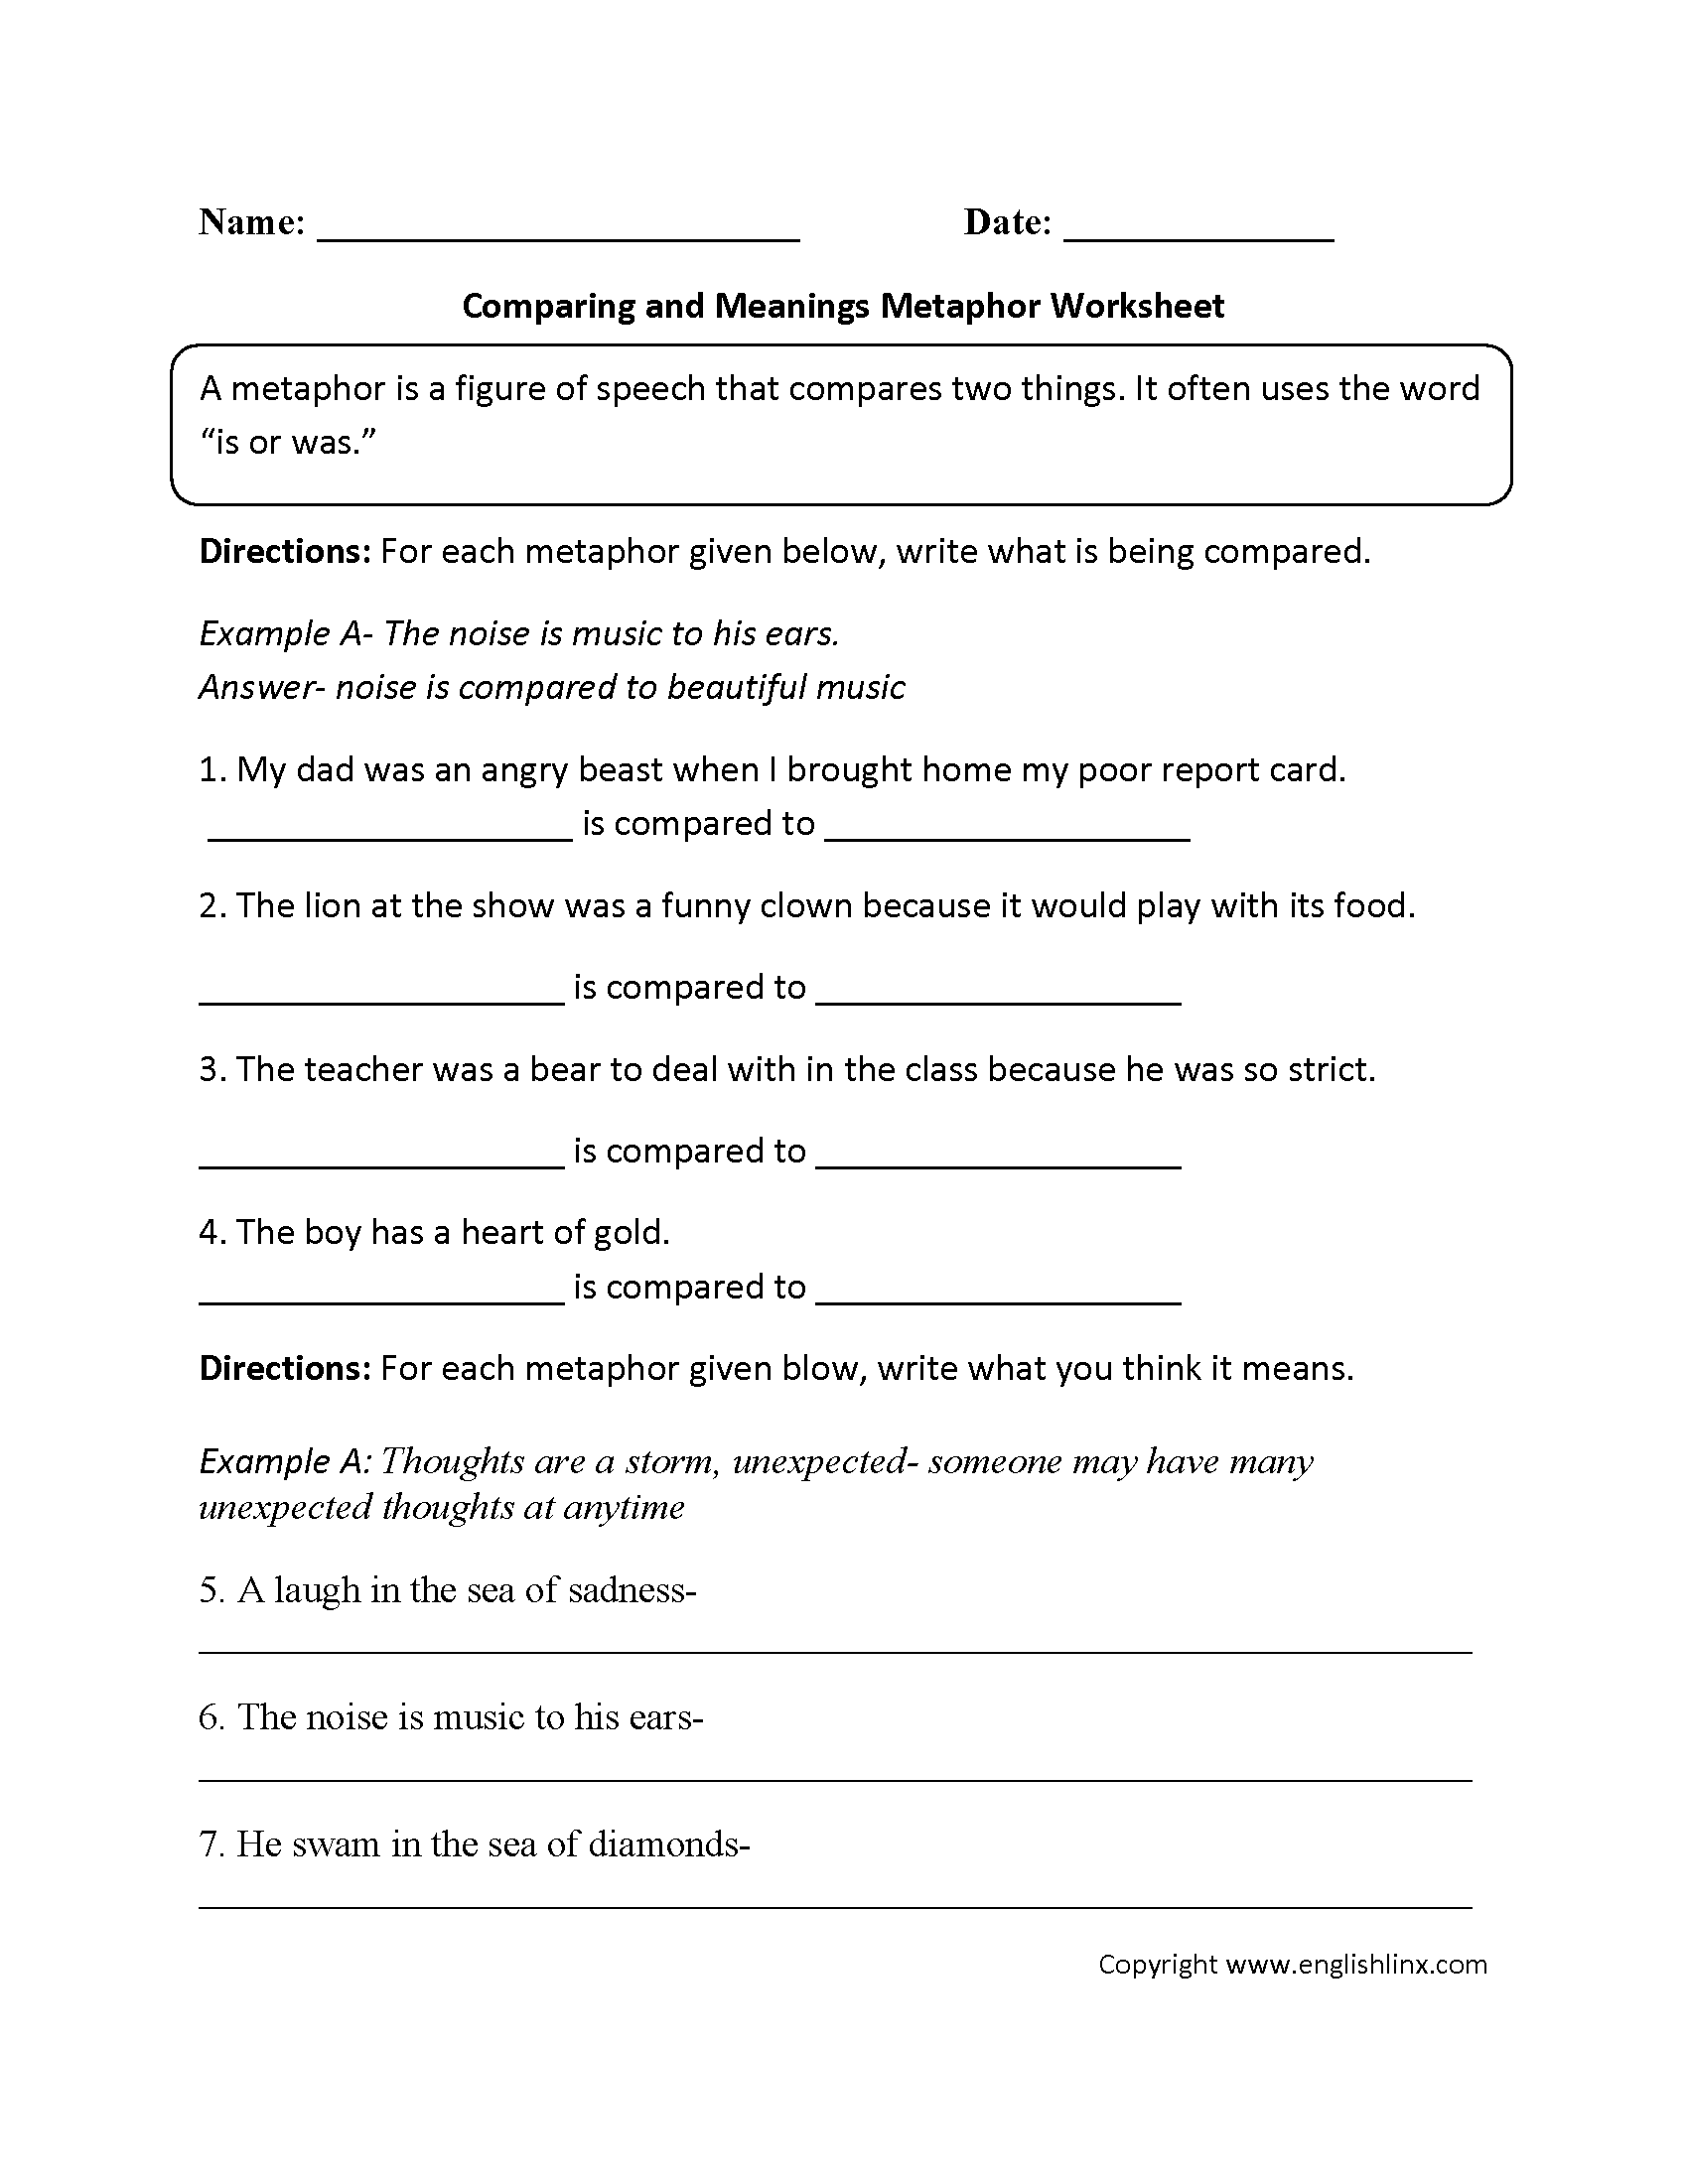 Comparing and Meanings Metaphor Worksheet